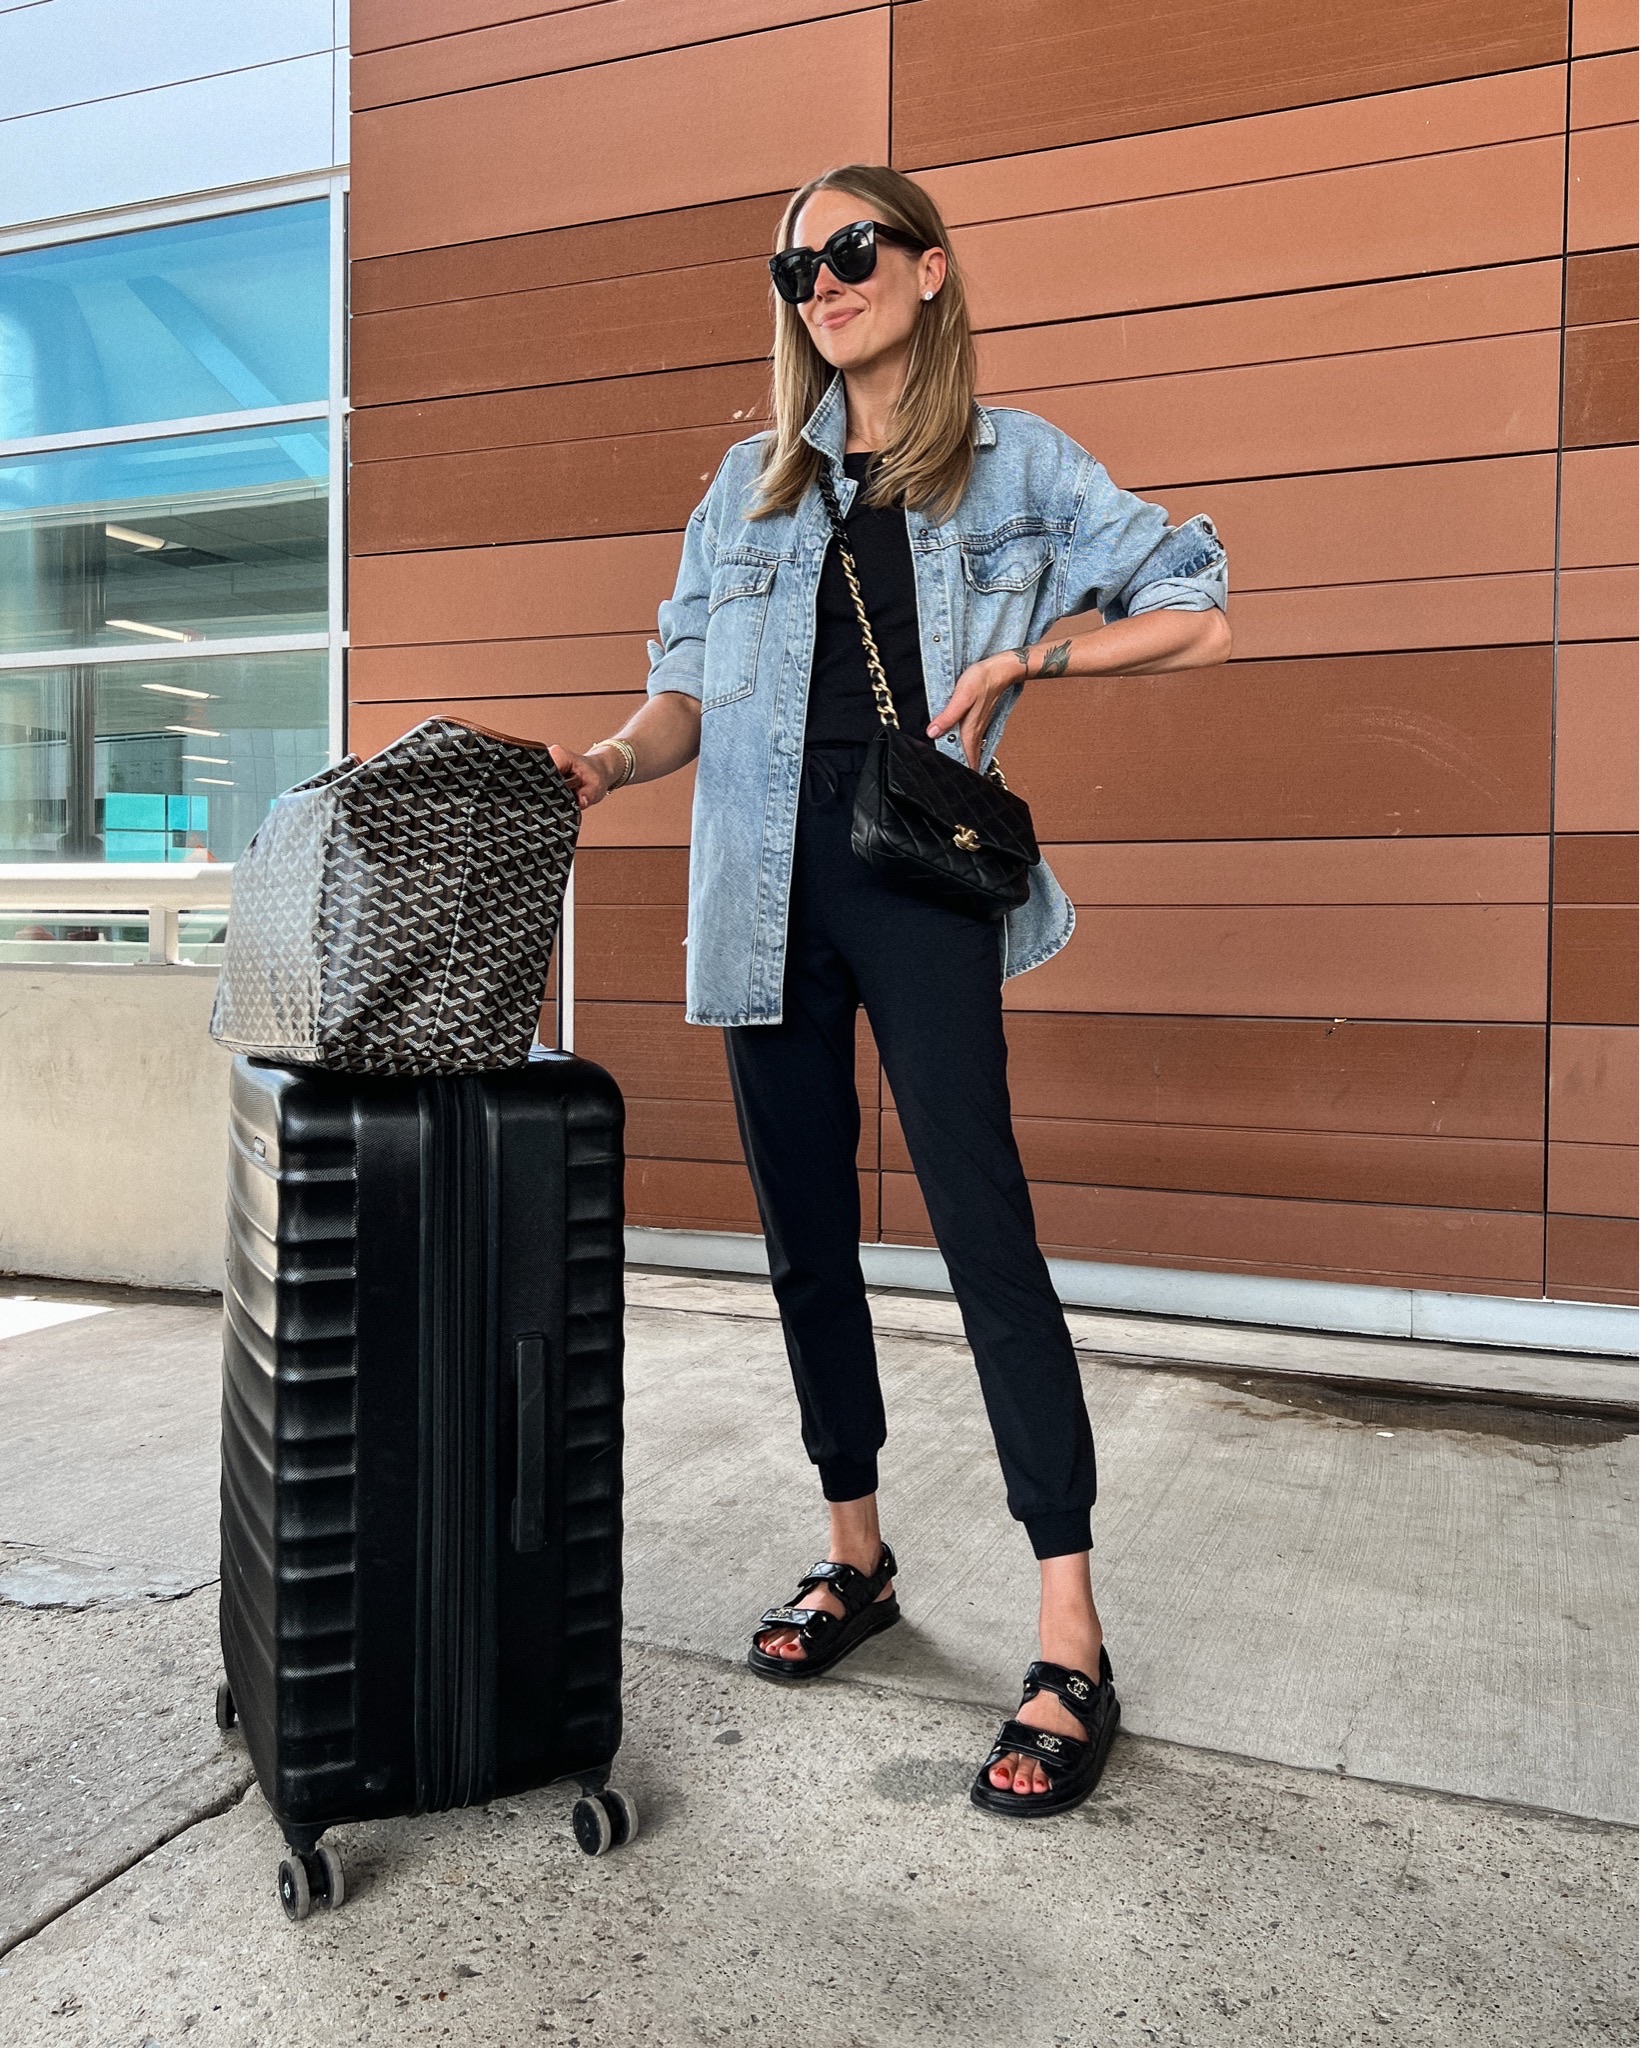 99 Best Airport Fashion ideas  fashion, travel style, airport style